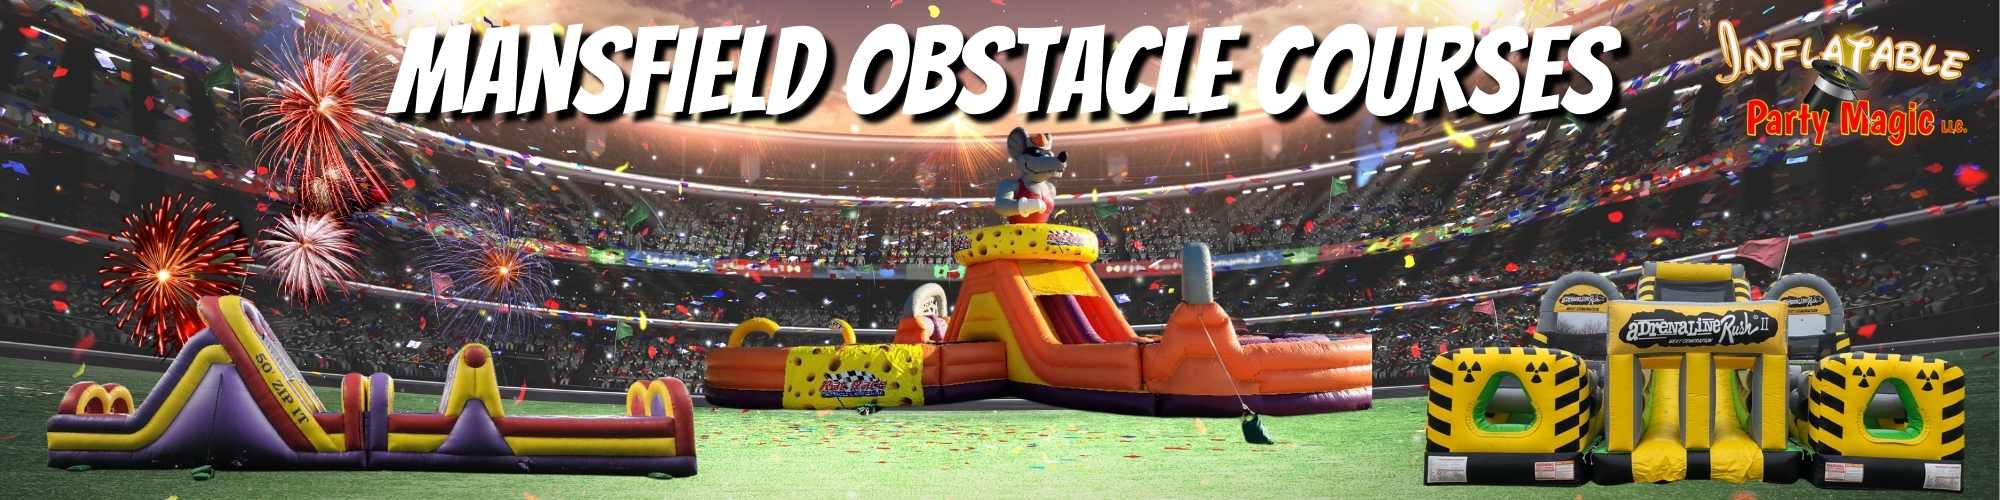 Mansfield Obstacle Course Rentals near me